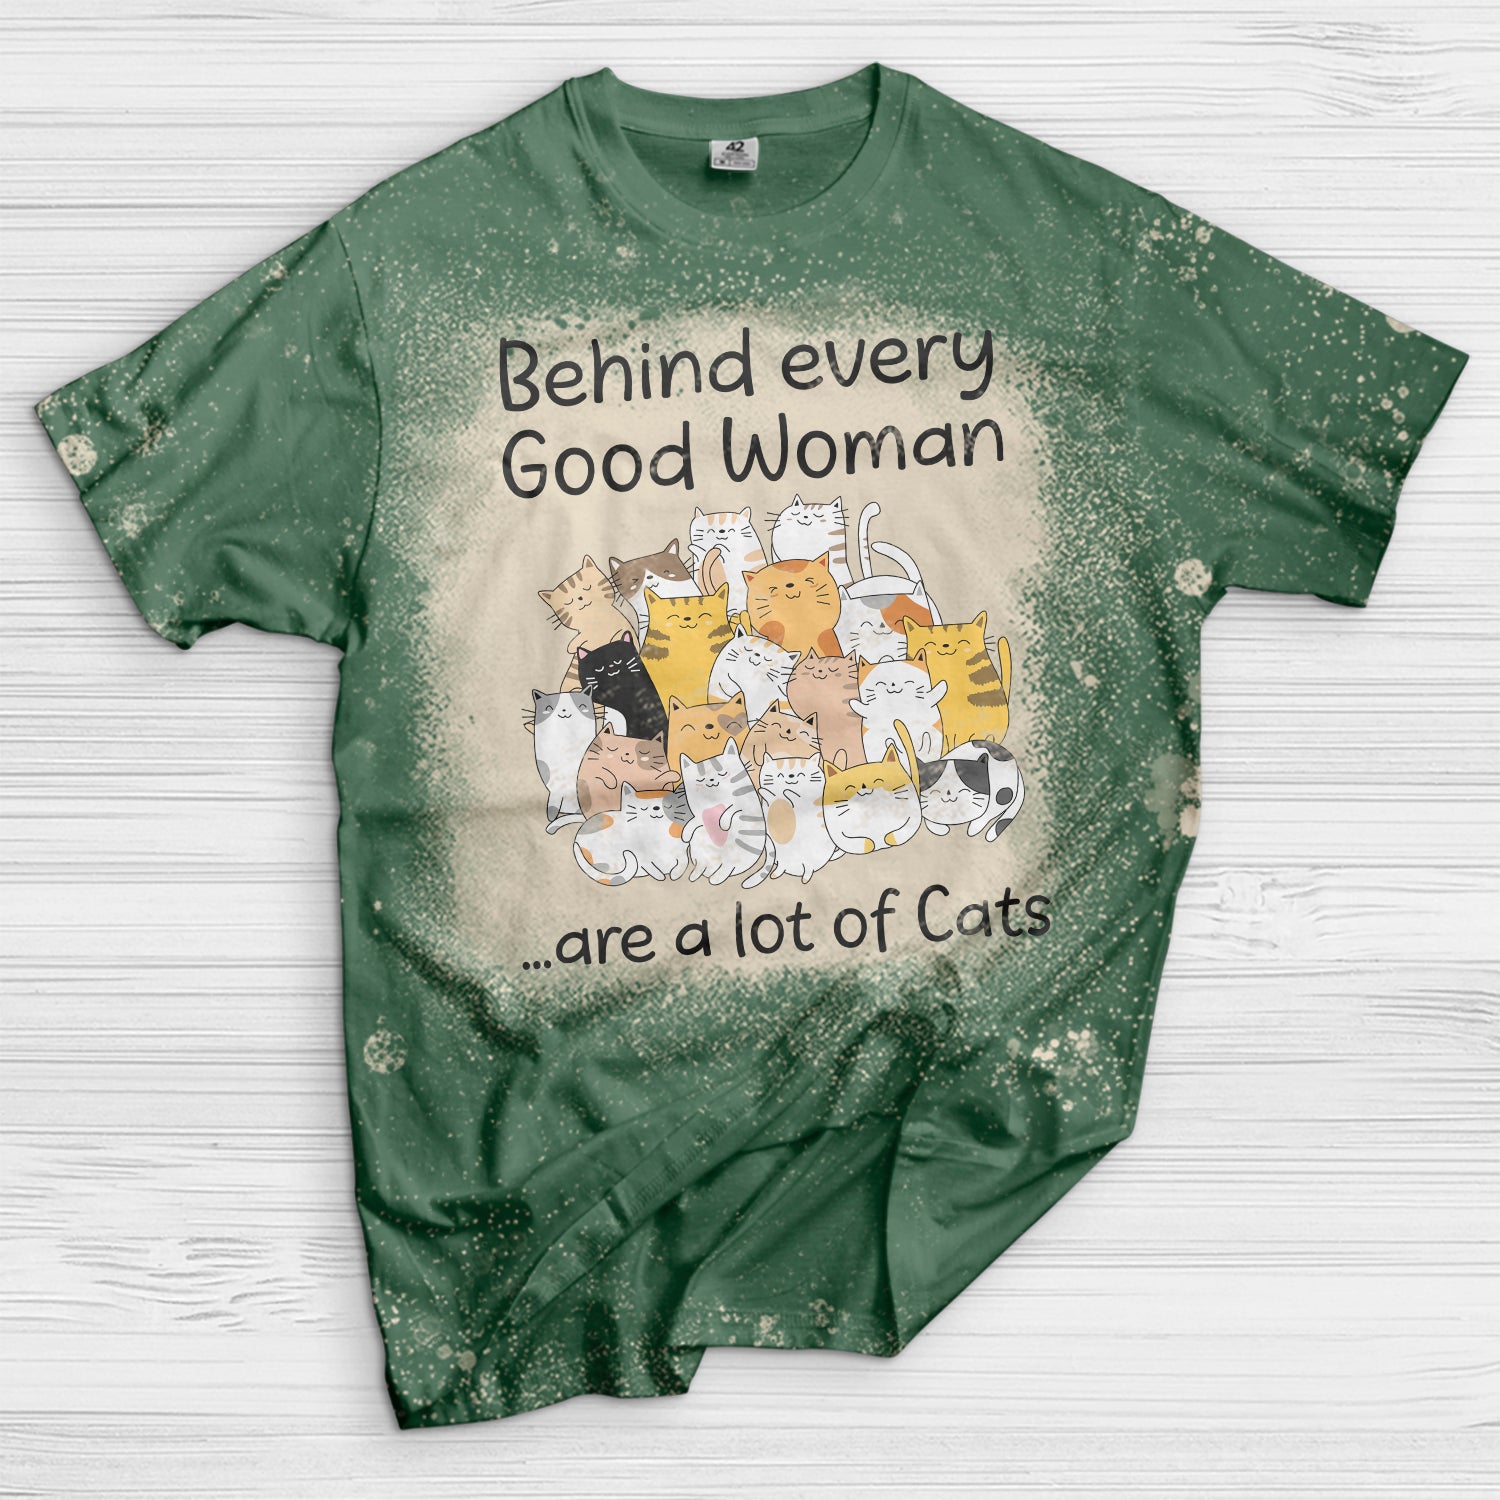 Behind every good woman are a lot of cats Bleached T-Shirt ...